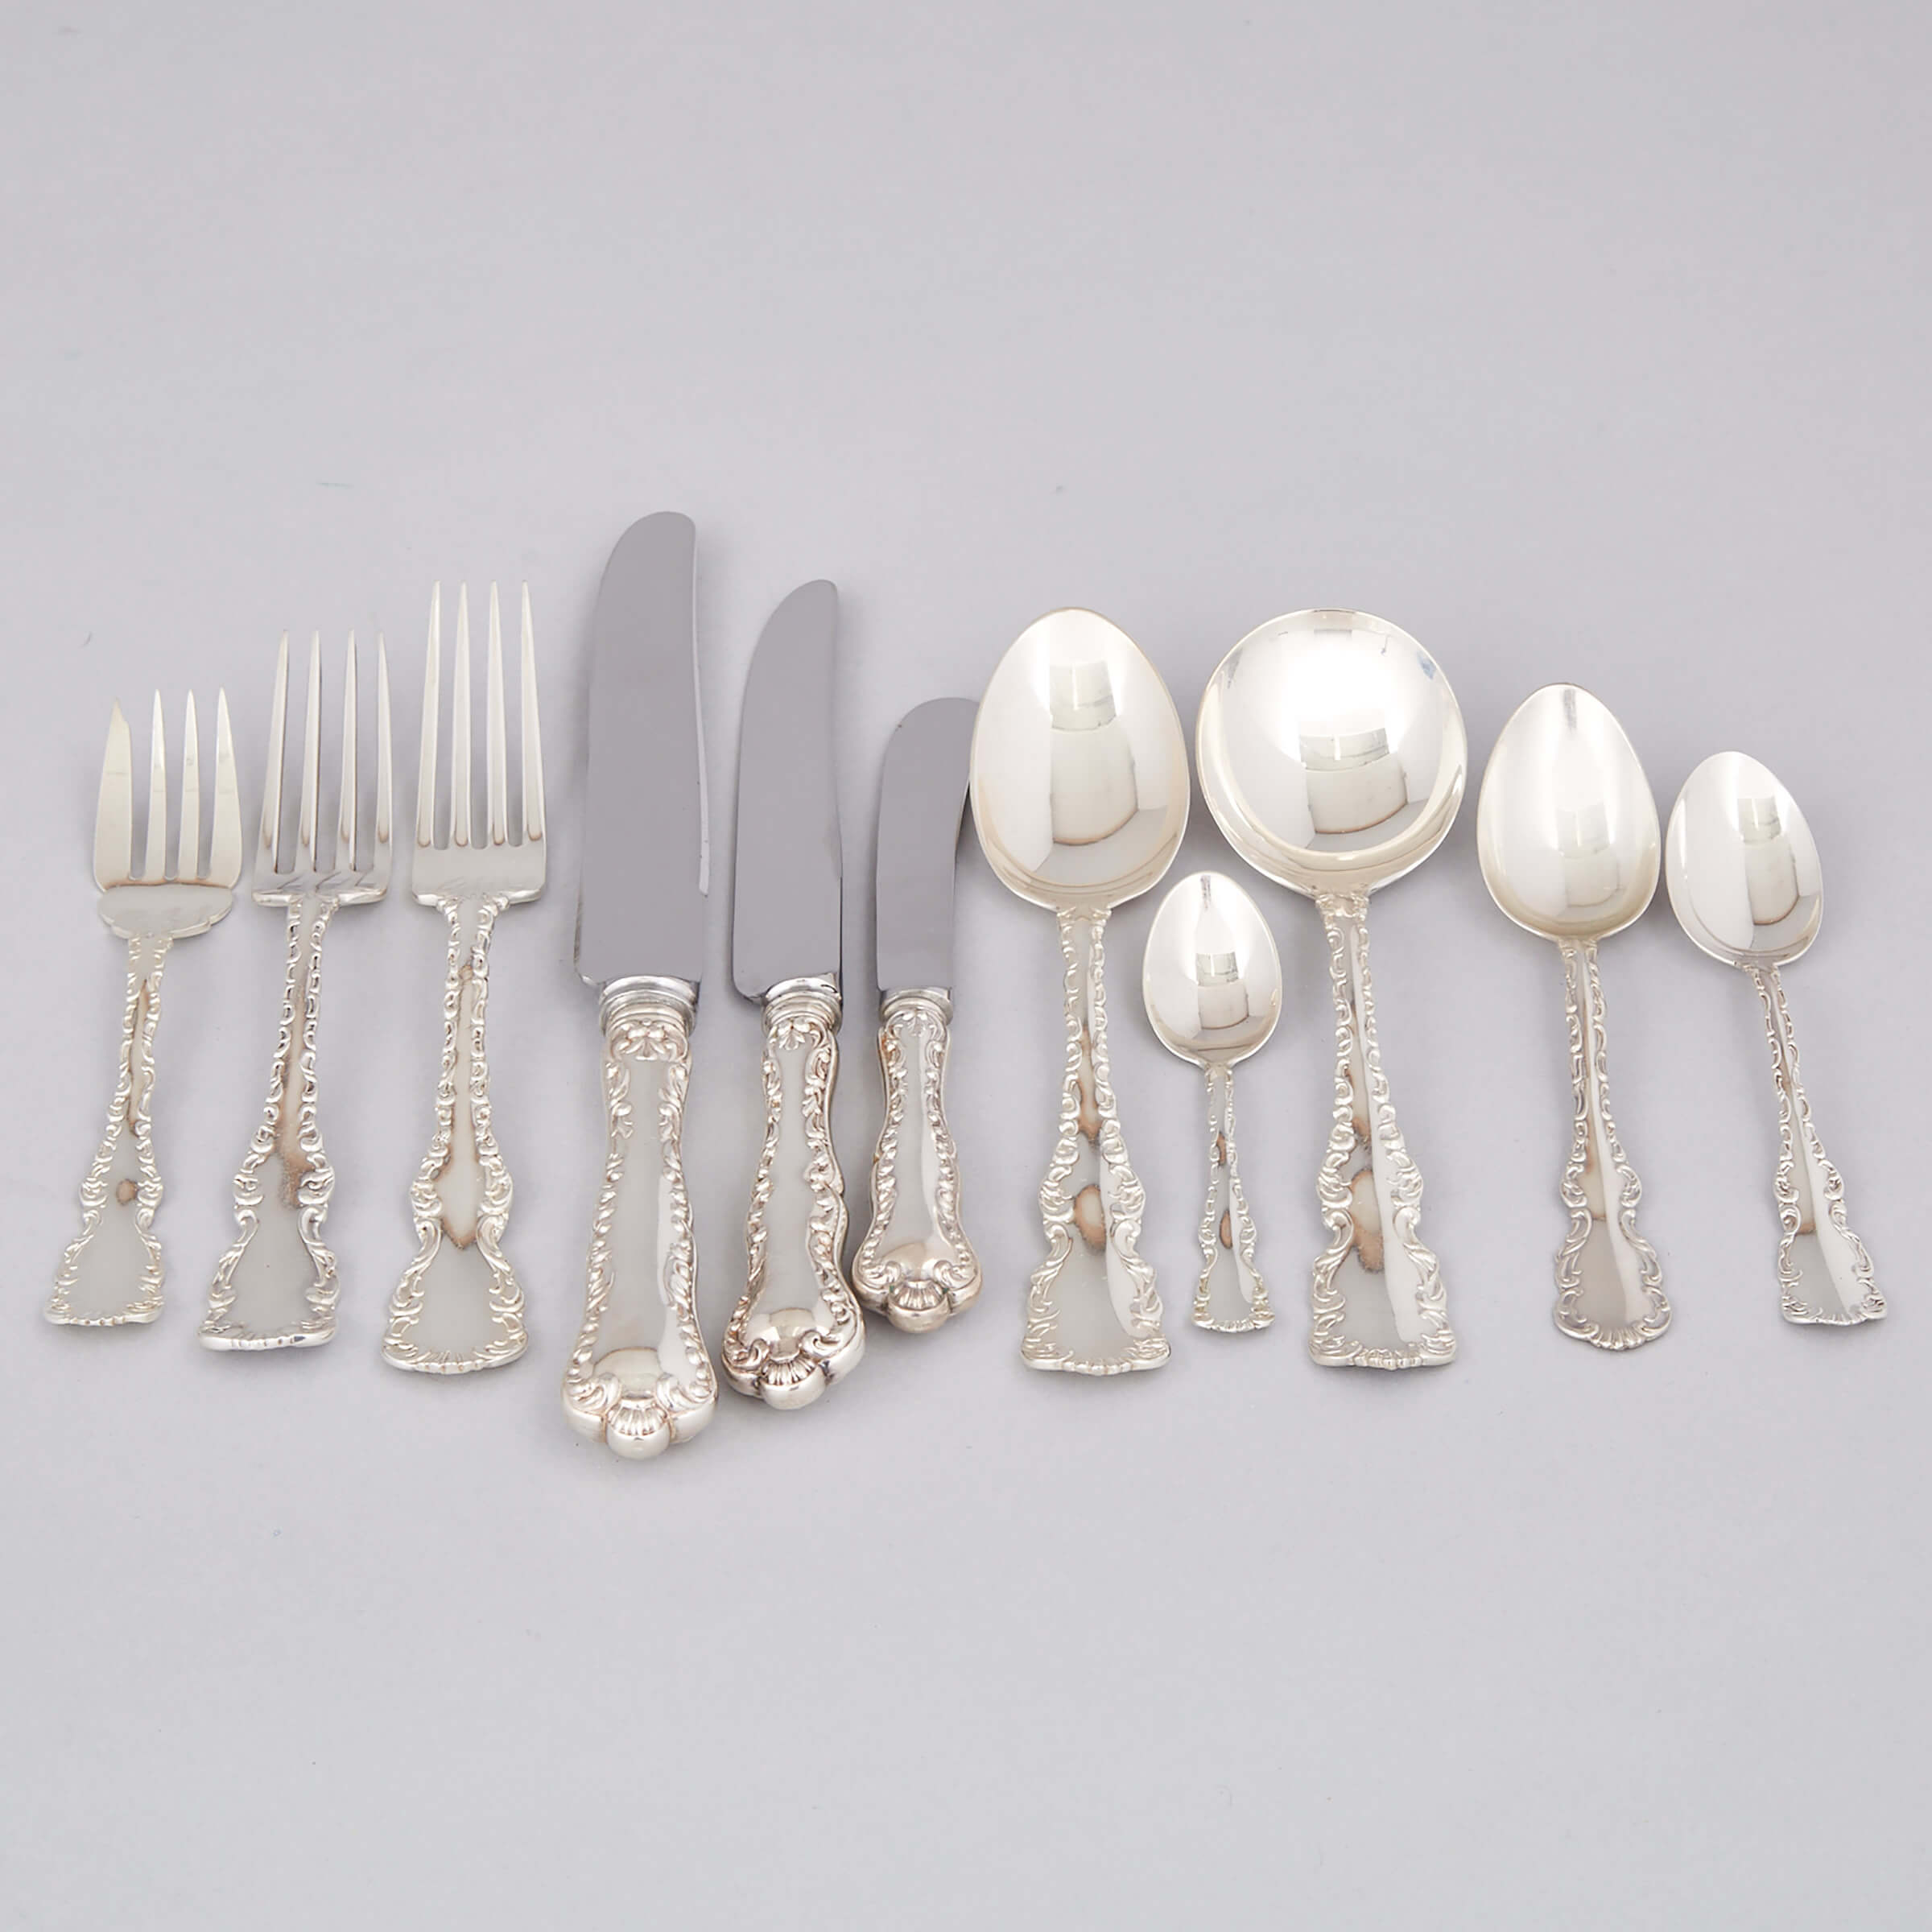 Assembled Canadian and American Silver ‘Louis XV’ Pattern Flatware Service, Henry Birks & Sons, Roden Brothers and Whiting Mfg. Co., 20th century